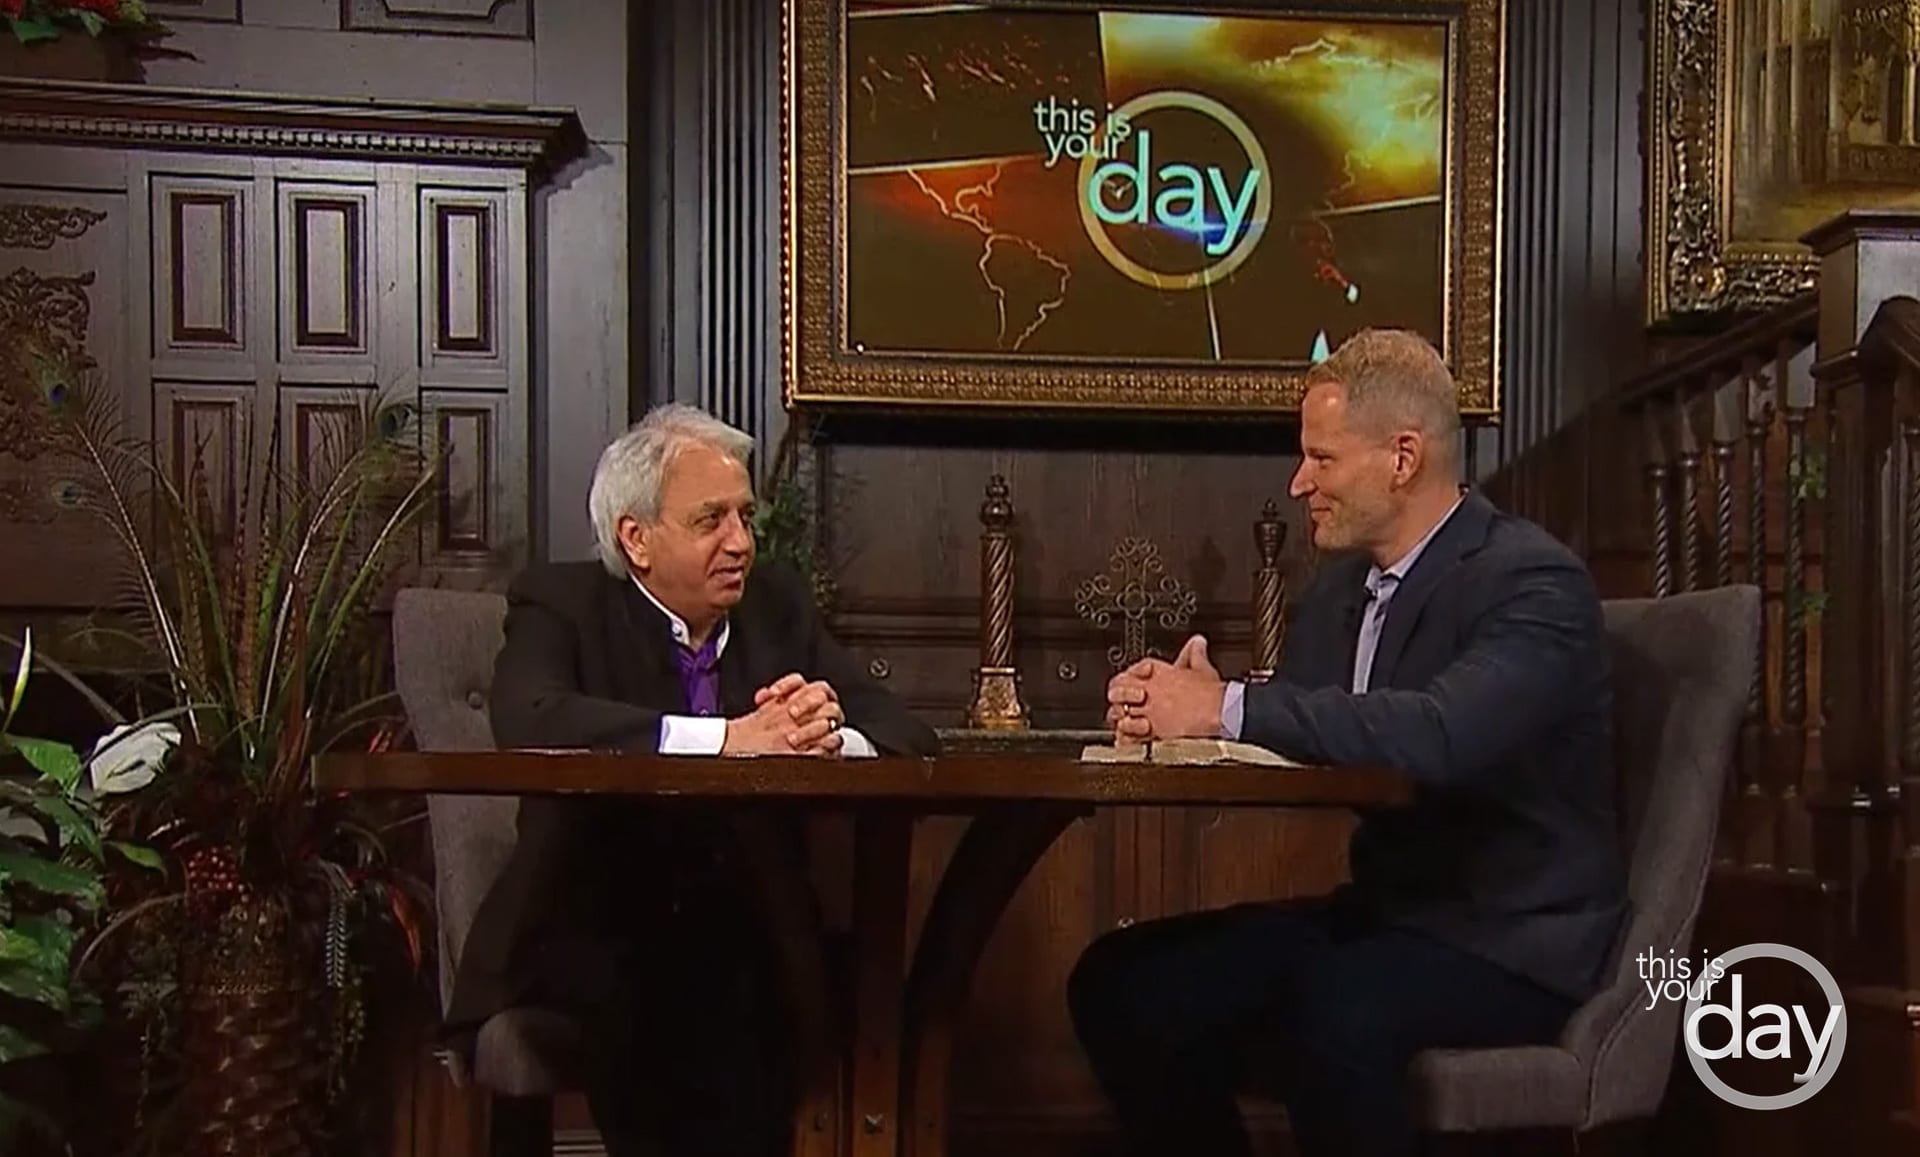 Living a Generous Life - This Is Your Day - Benny Hinn Ministries